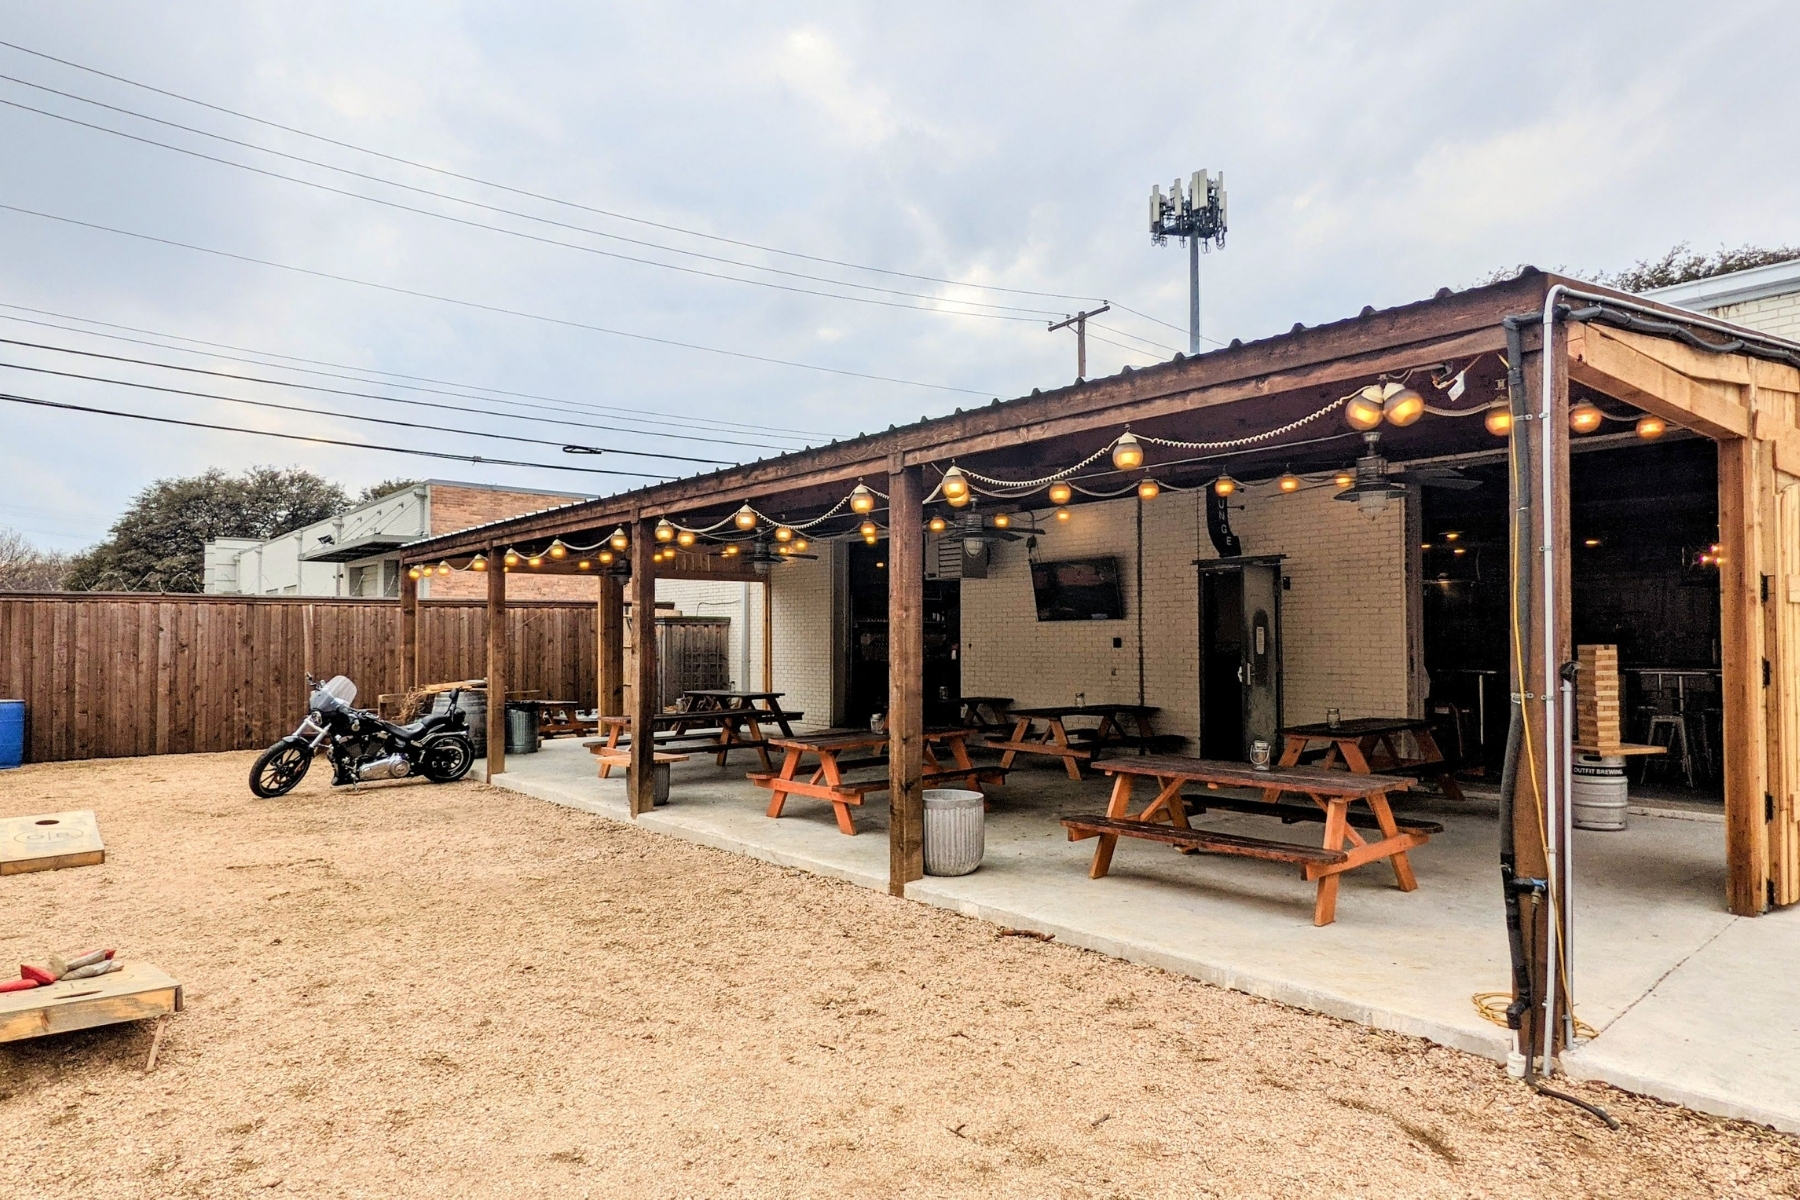 The exterior and outdoor patio space at Outfit Brewery with simple picnic tables where you can sit and sip a brew.